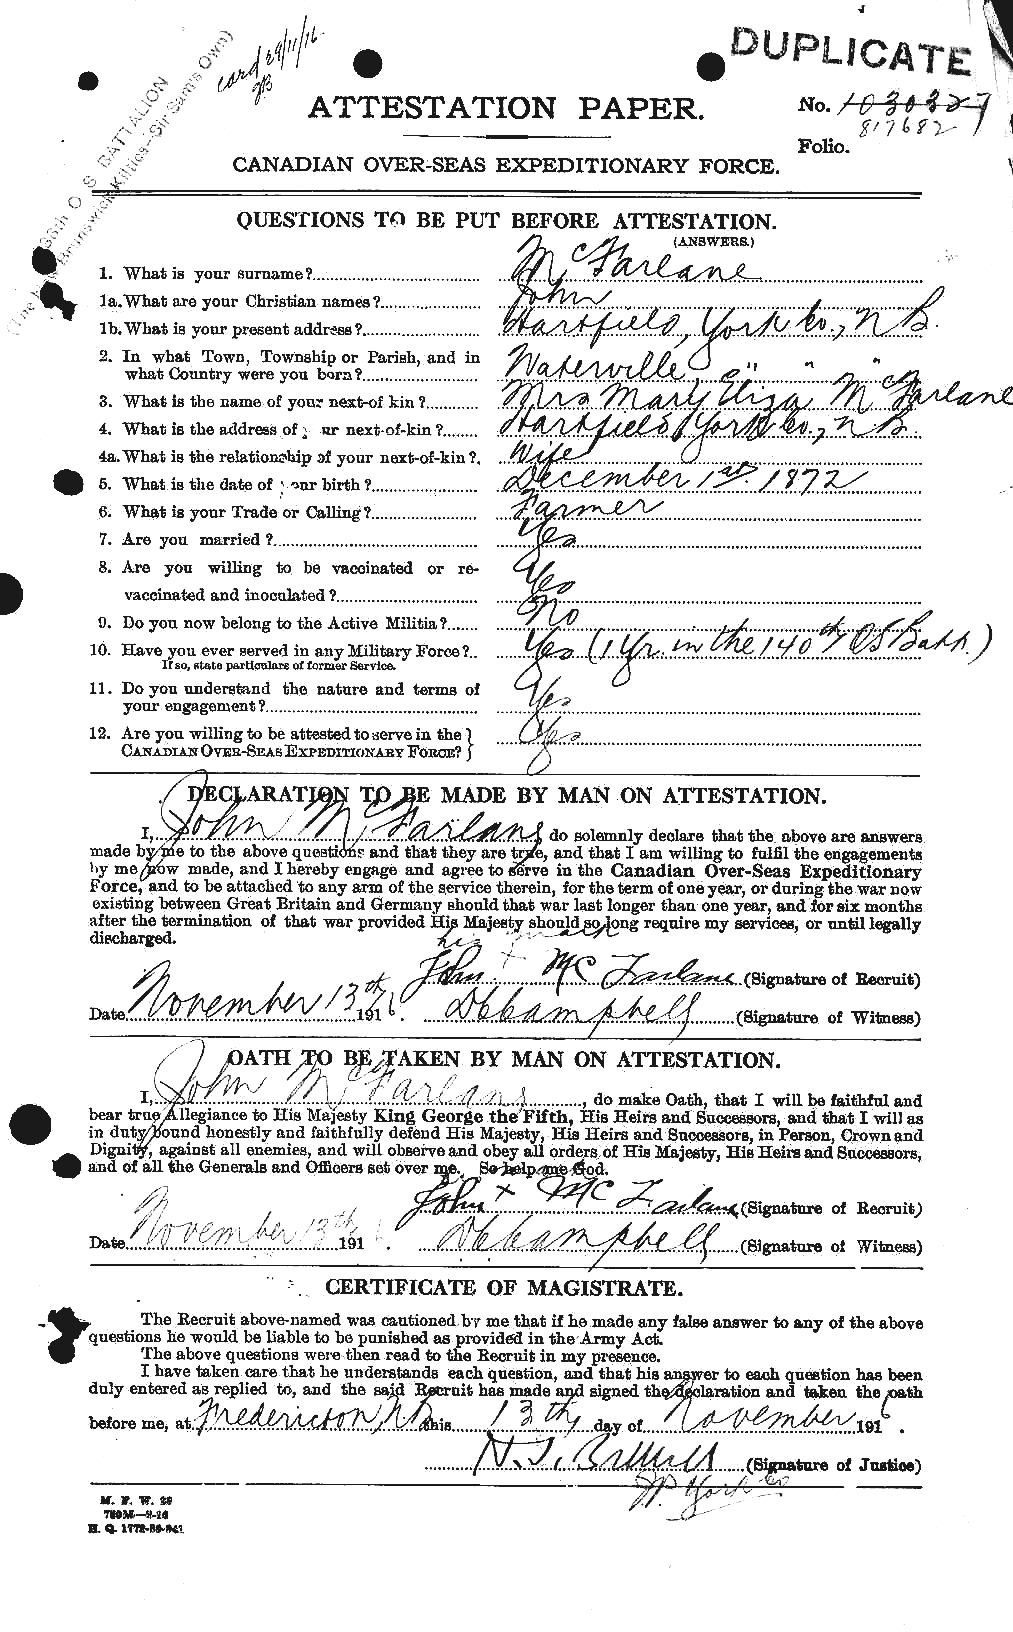 Personnel Records of the First World War - CEF 521867a